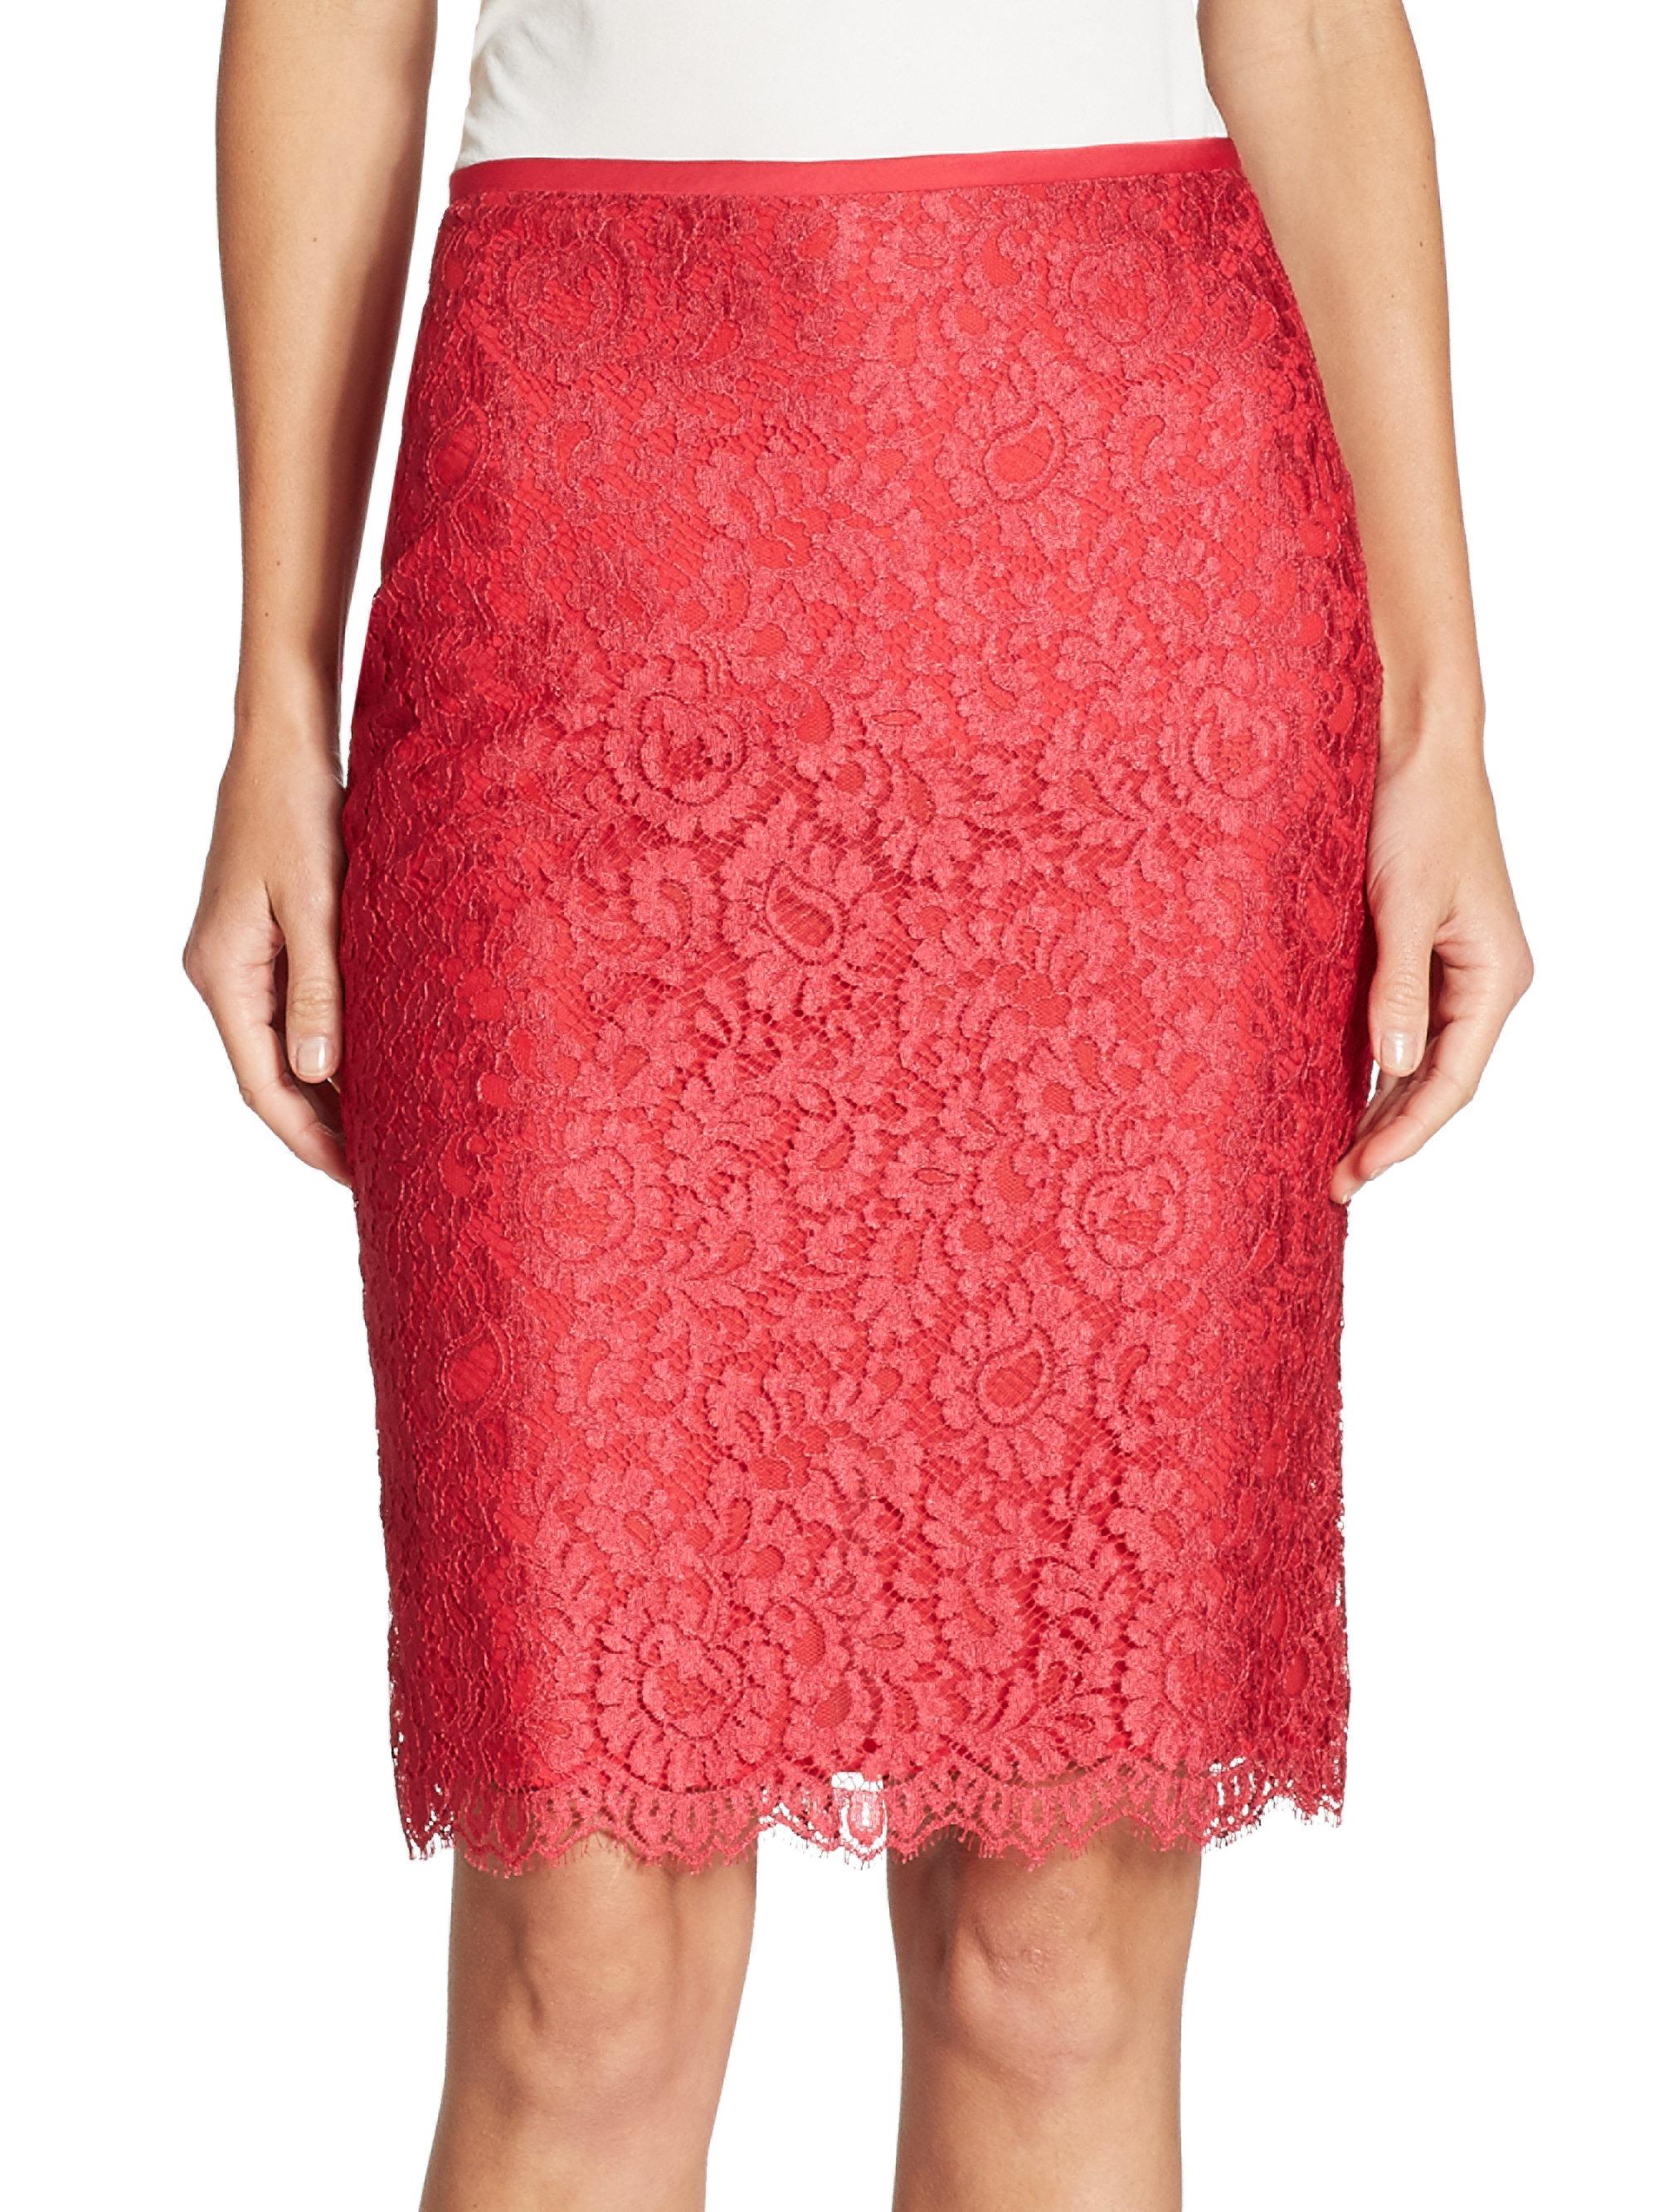 Lyst - St. John Paisley Lace Skirt in Red